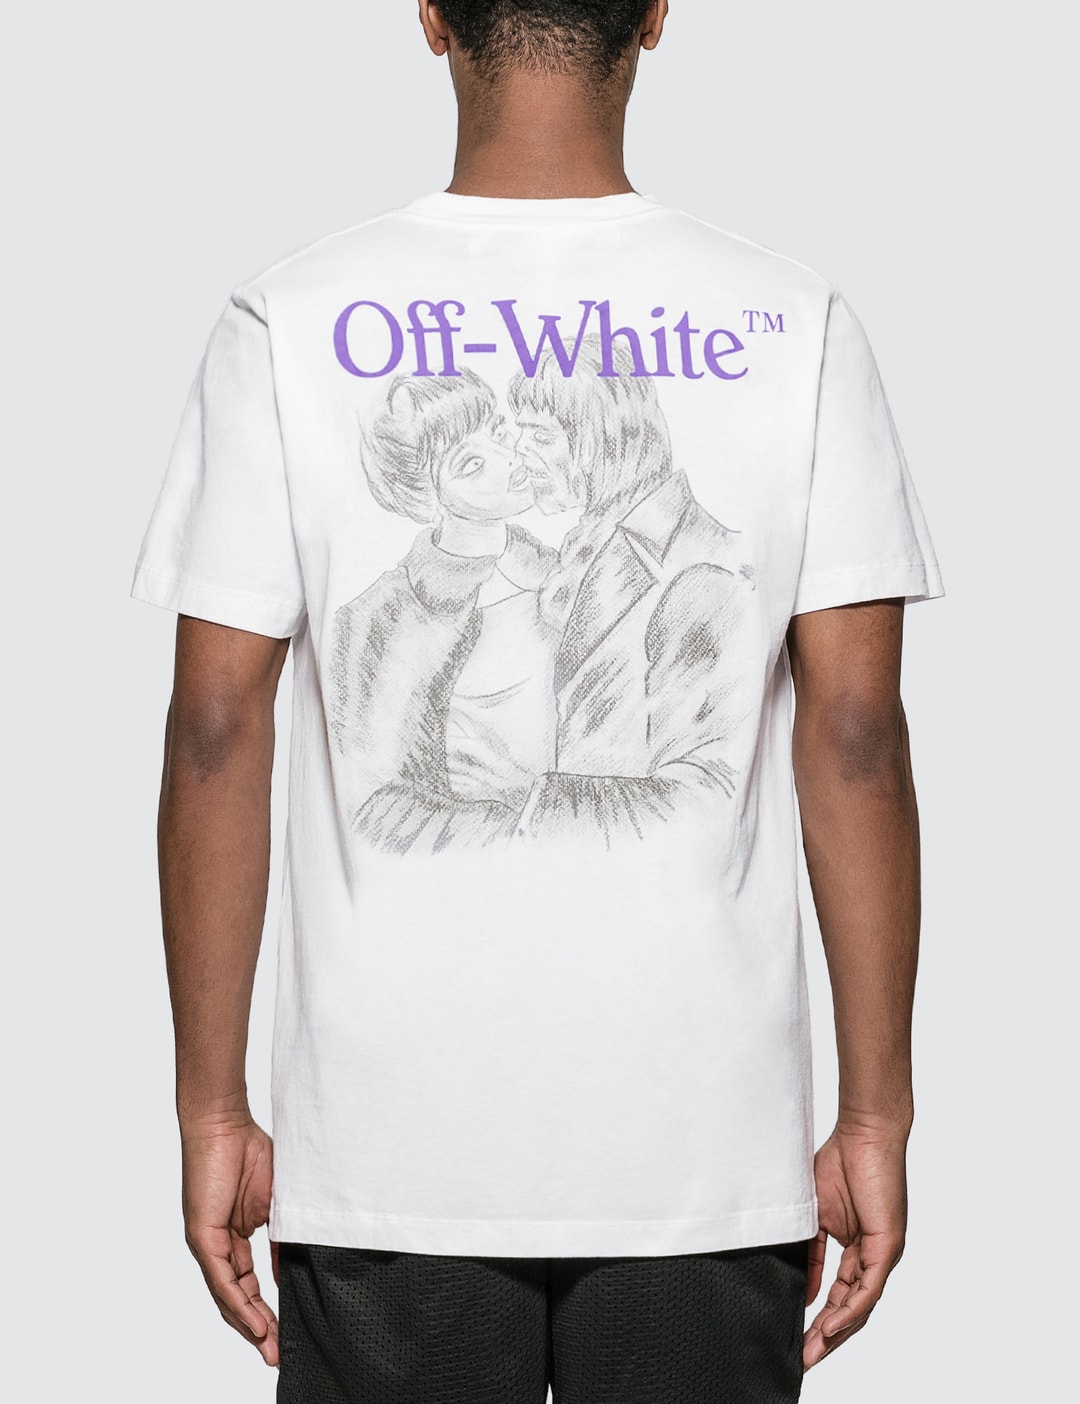 Off-White™ Kiss T-shirt HBX - Globally Curated Fashion and Lifestyle Hypebeast